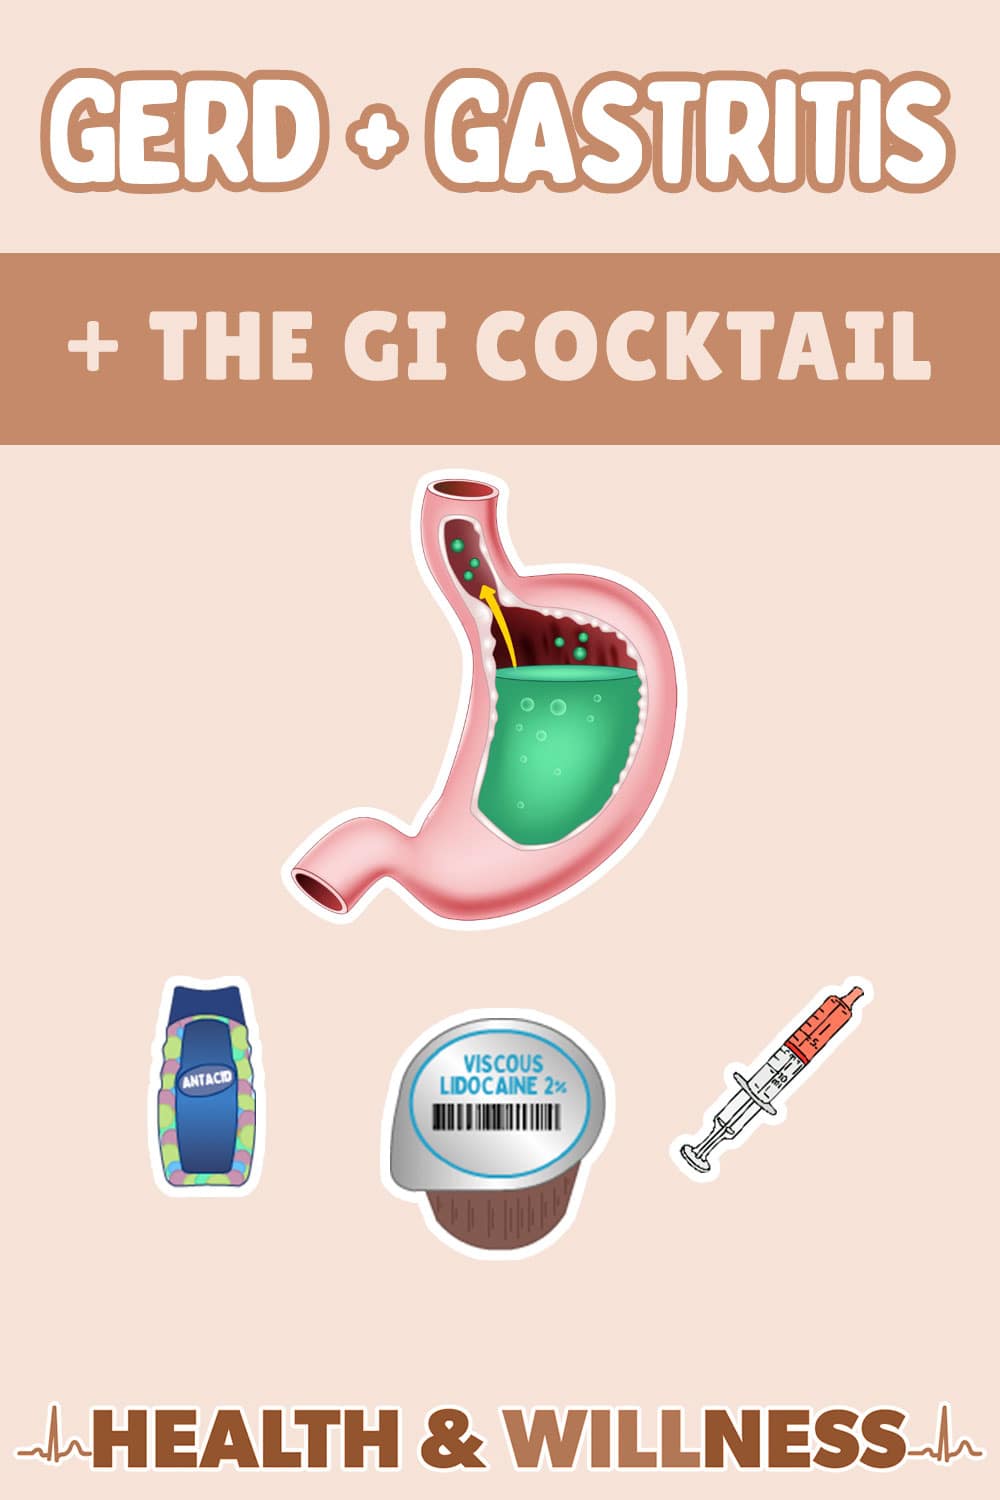 GERD, Gastritis, and the GI Cocktail Pin